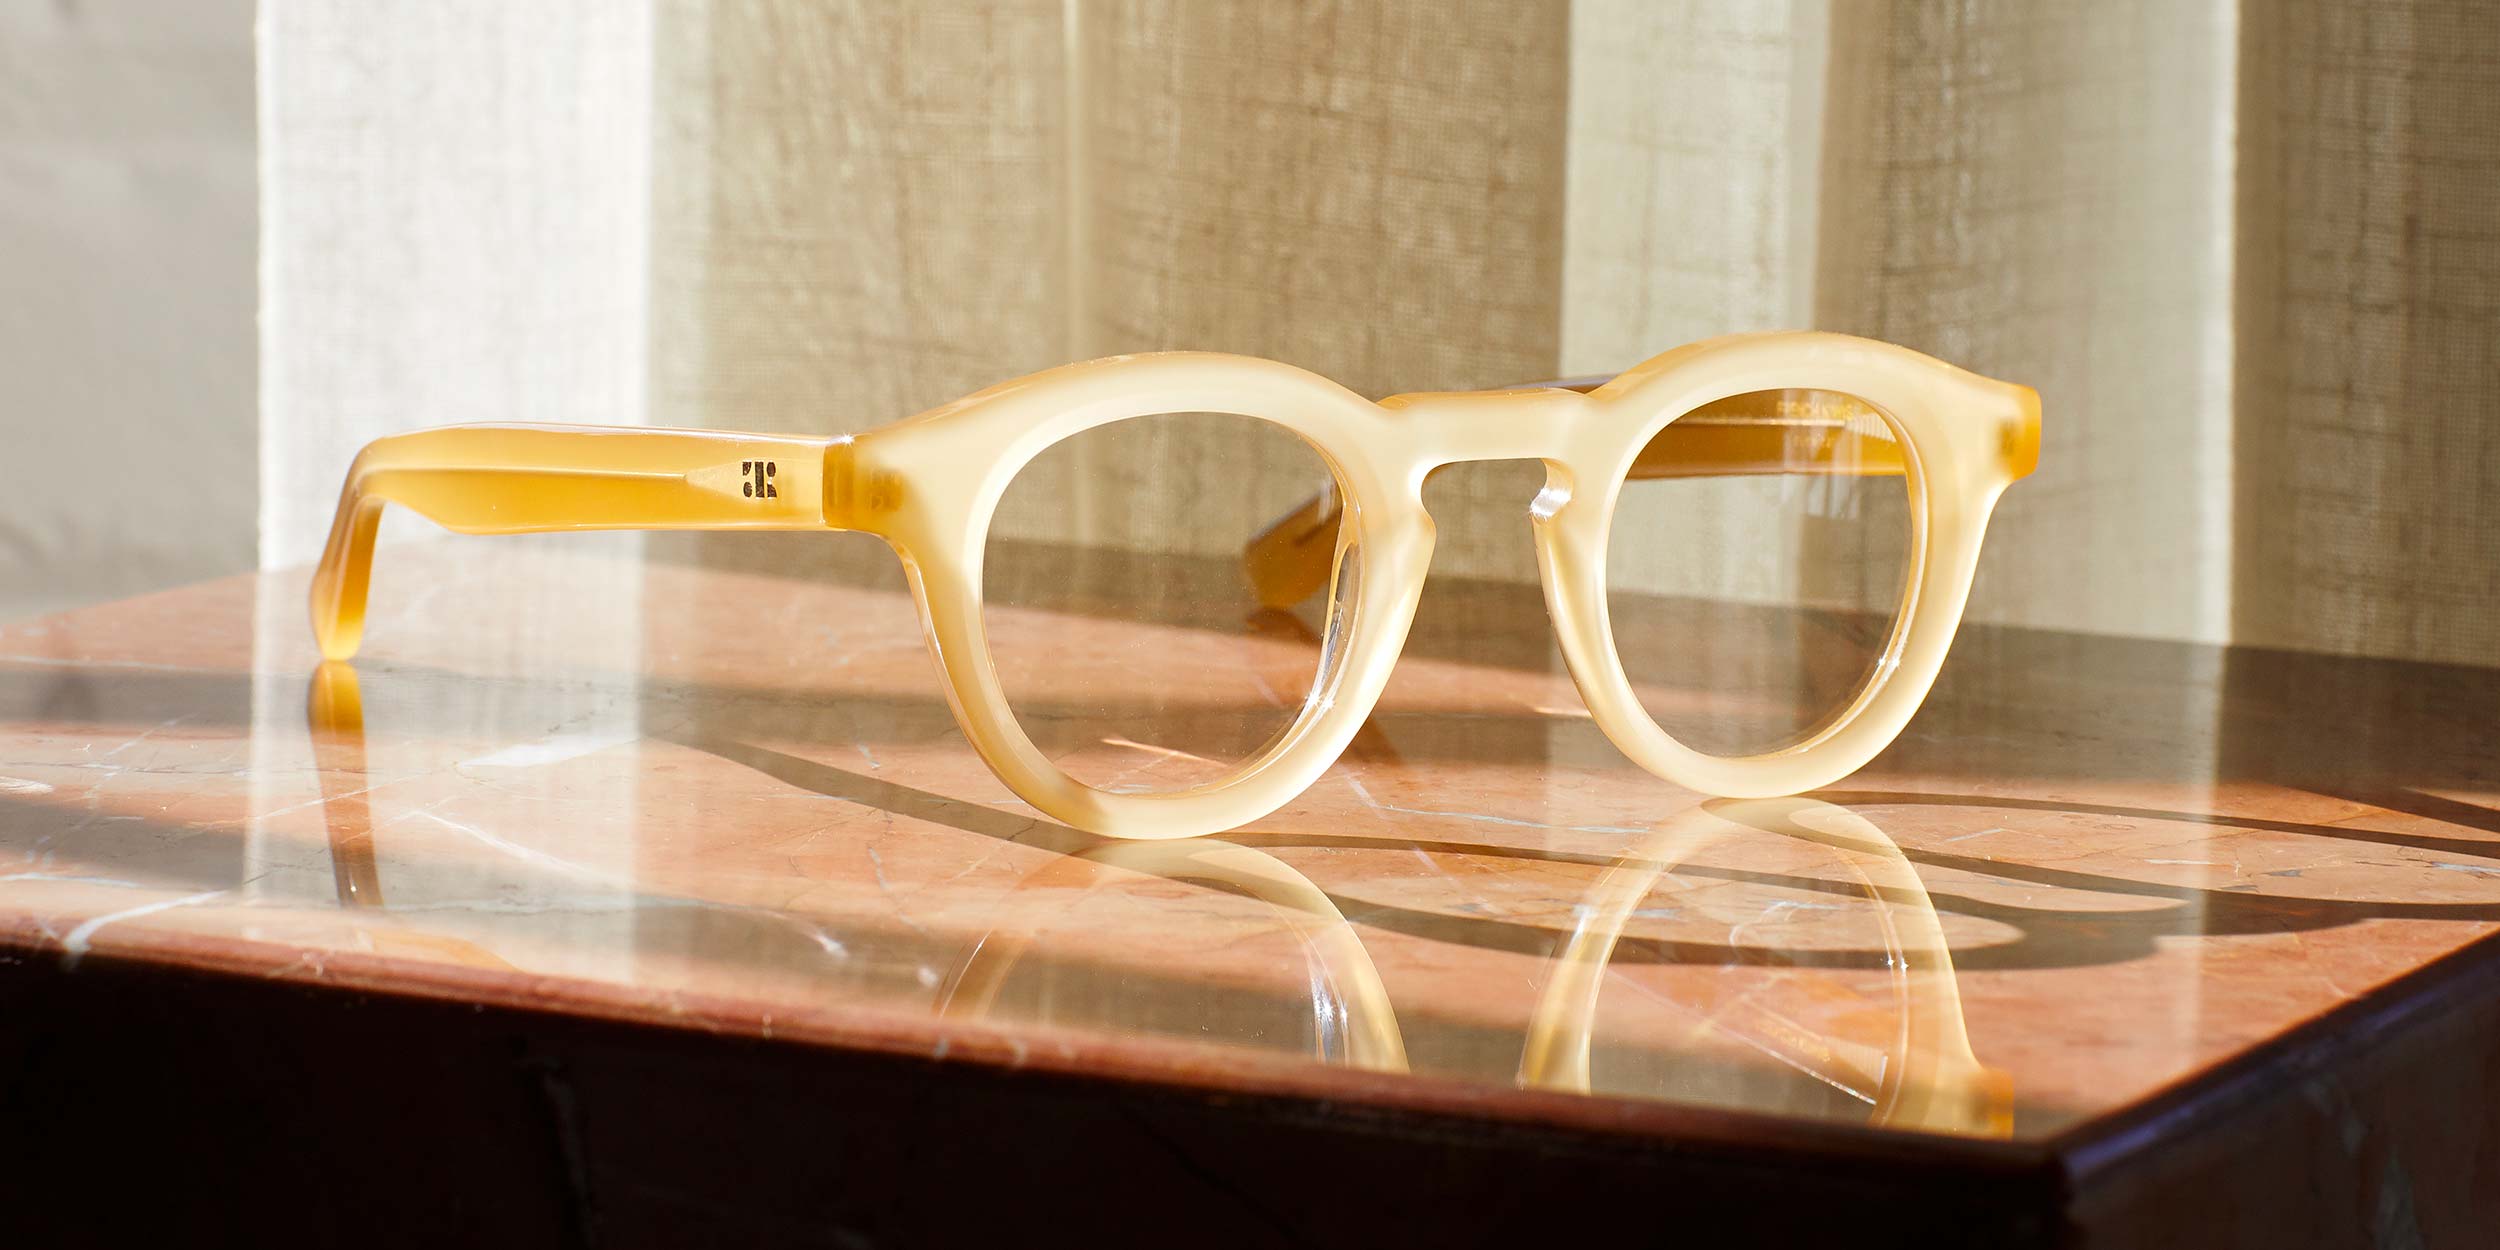 Photo Details of Jude Cognac Reading Glasses in a room